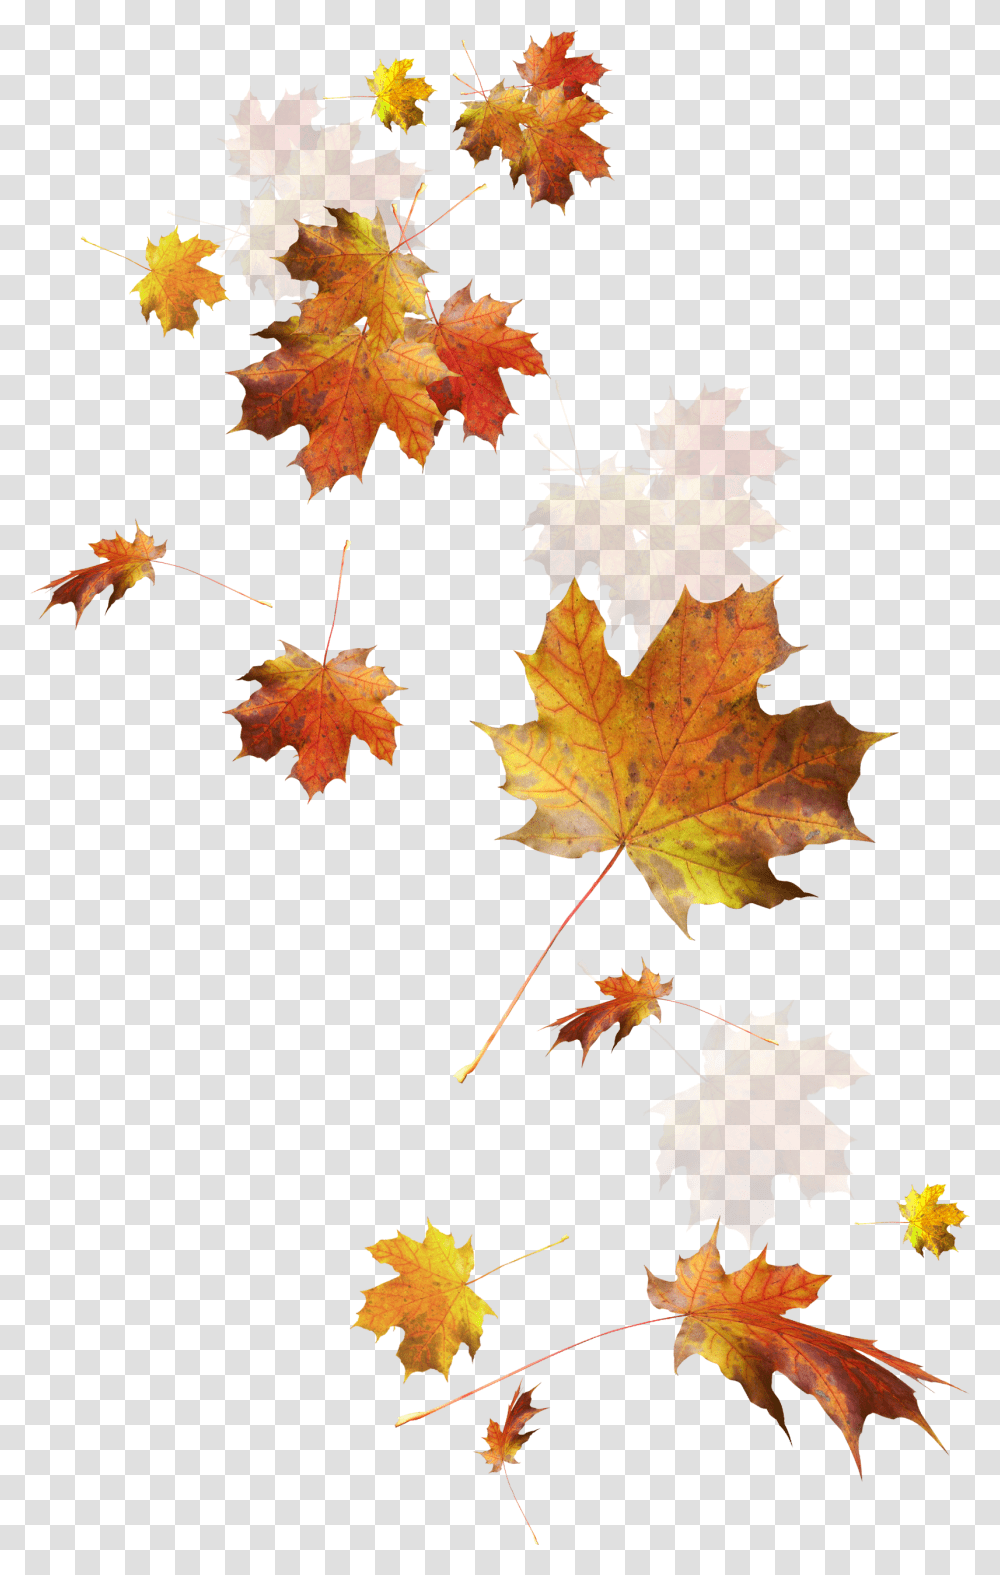 Autumn Color Leaves Leaf Falling Download Hd Clipart Fall Leaves Background, Plant, Collage, Poster, Advertisement Transparent Png